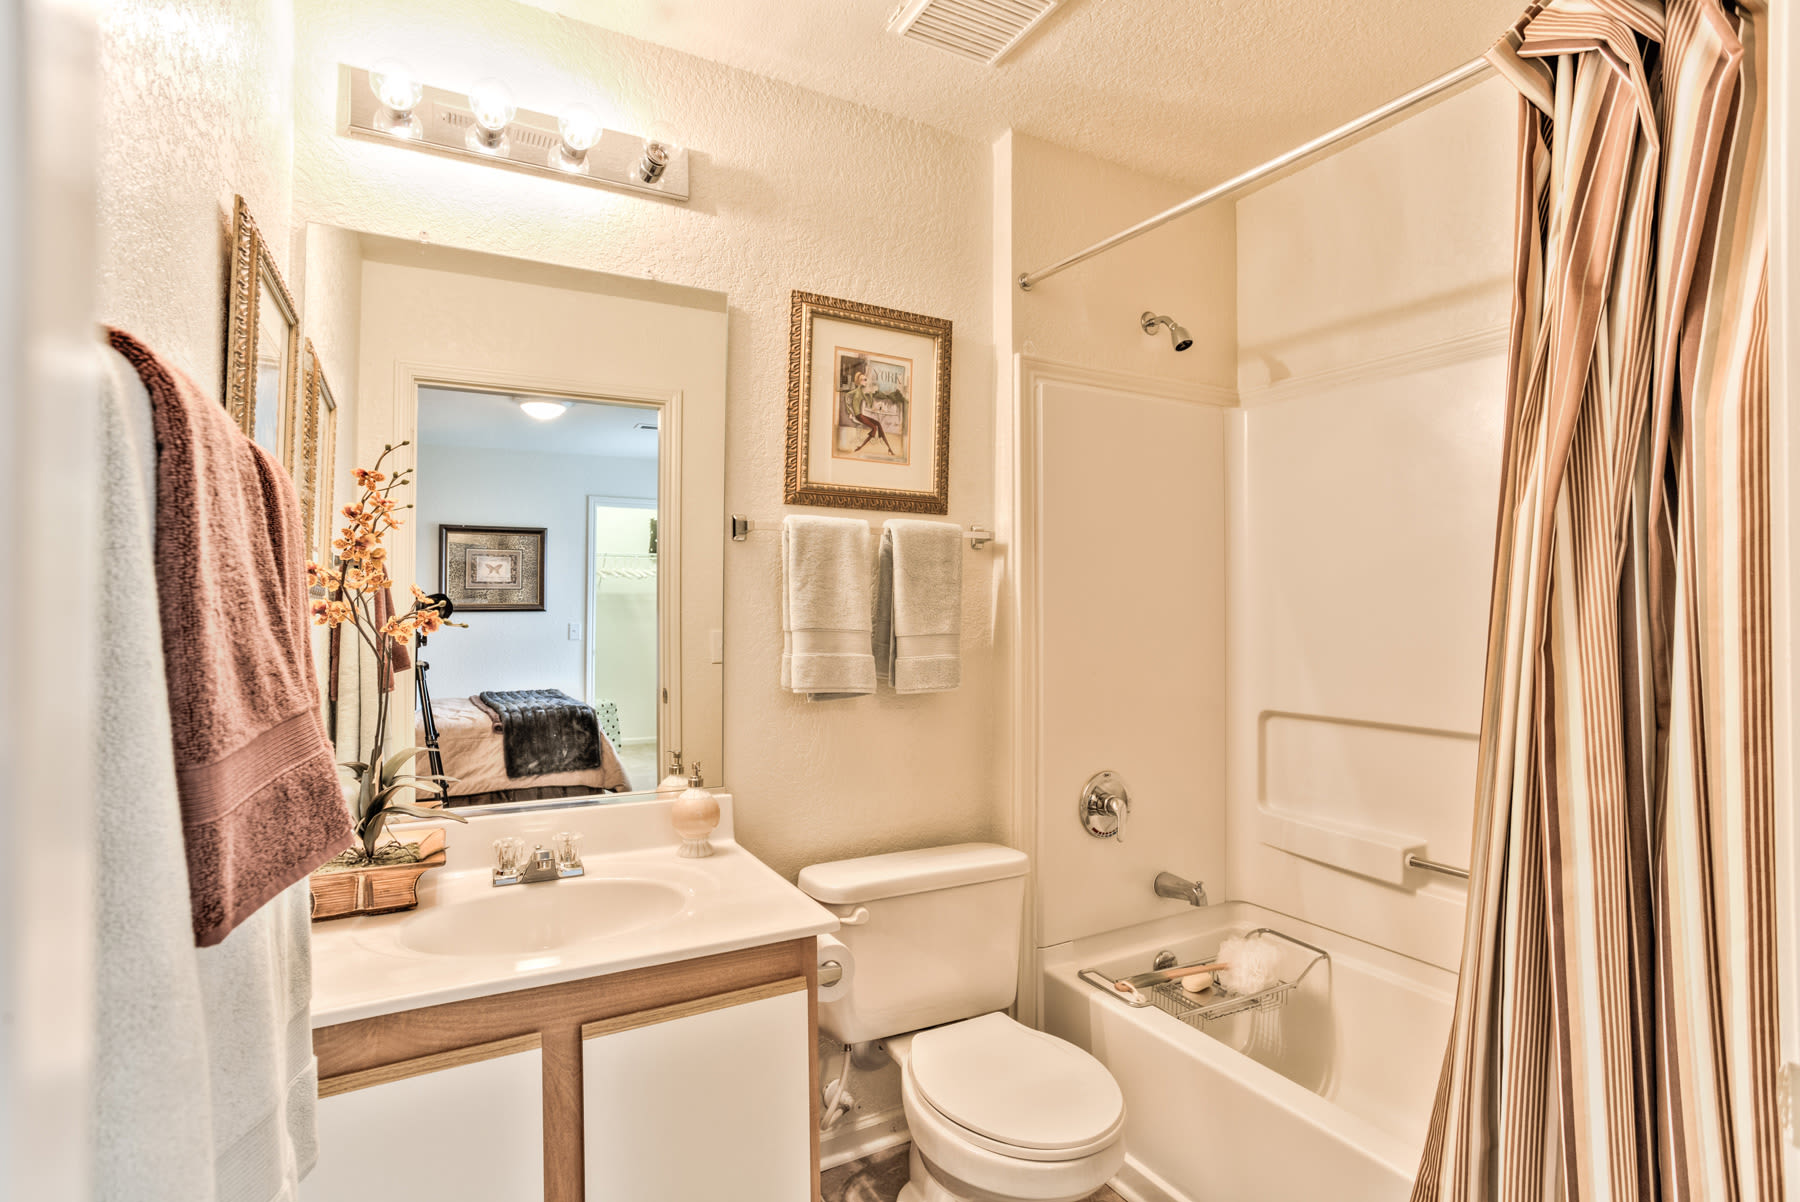 Spacious bathroom at Copper Mill Village in High Point, North Carolina